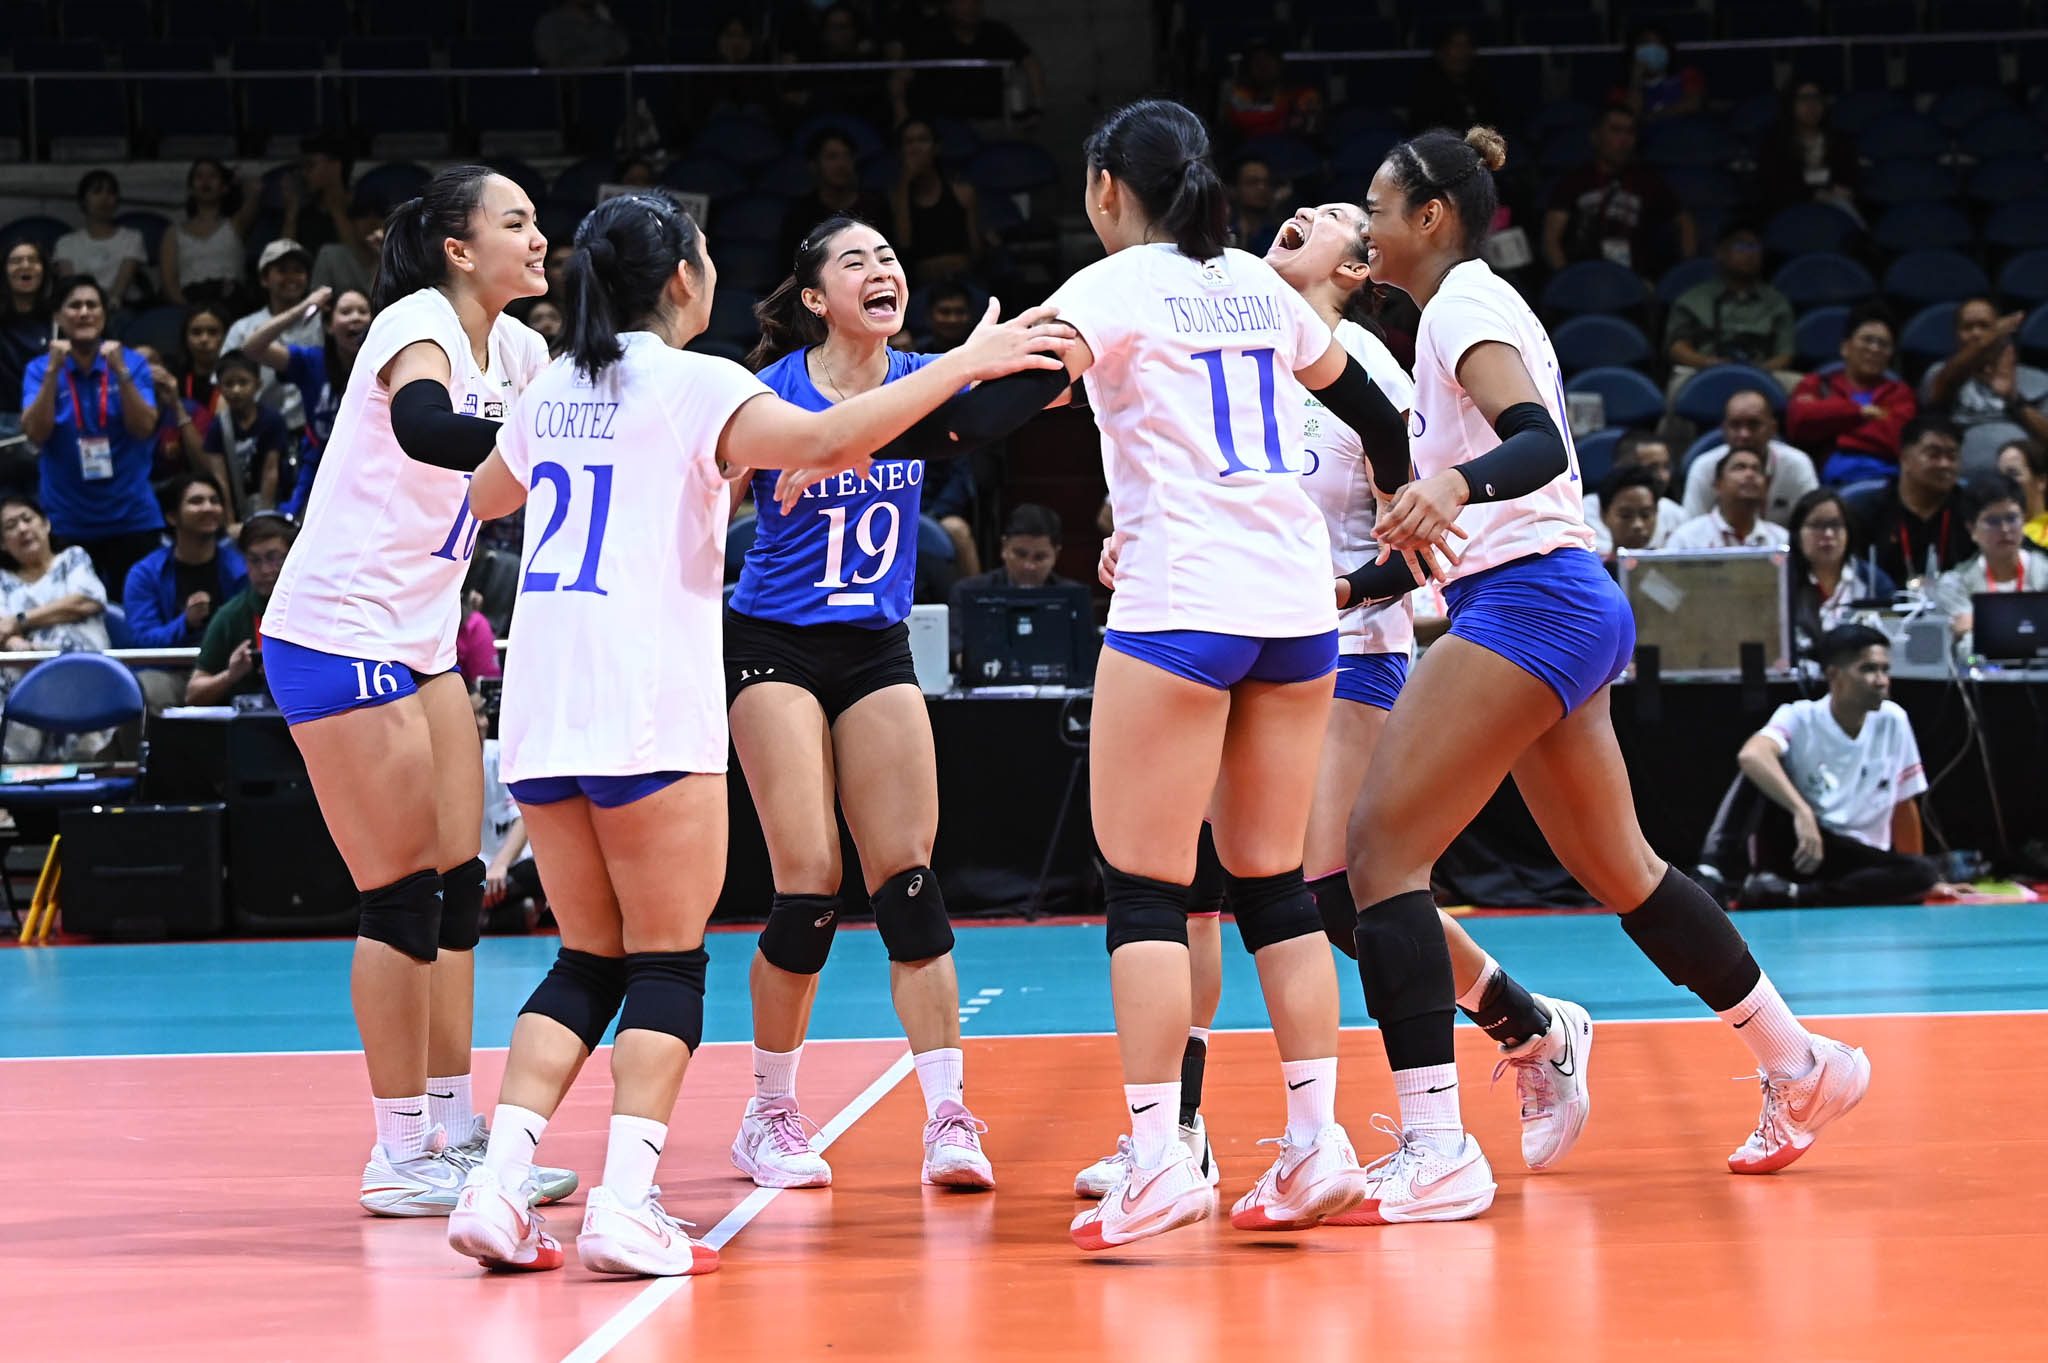 Win or lose: Ateneo captain Doromal thanks remaining fans amid lowering attendance